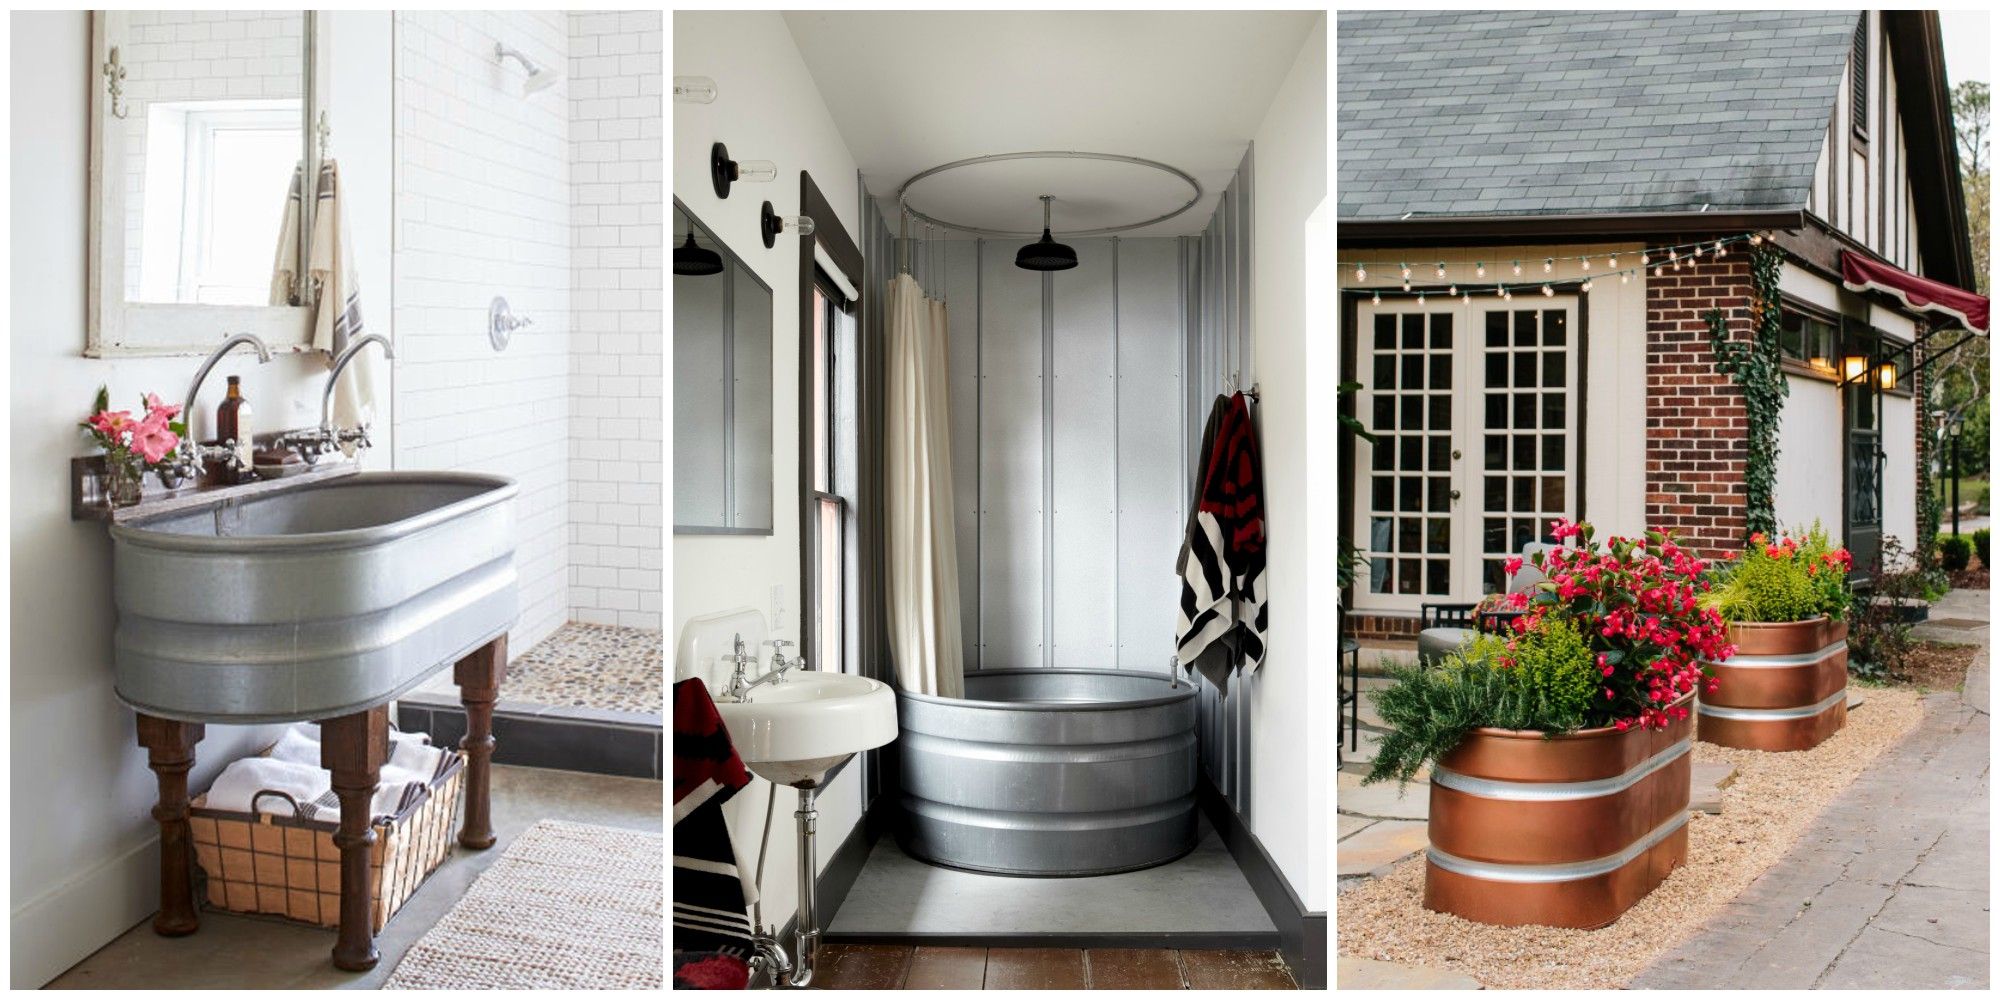 15 Genius Ways To Use Stock Tanks In, Horse Trough For Bathtub